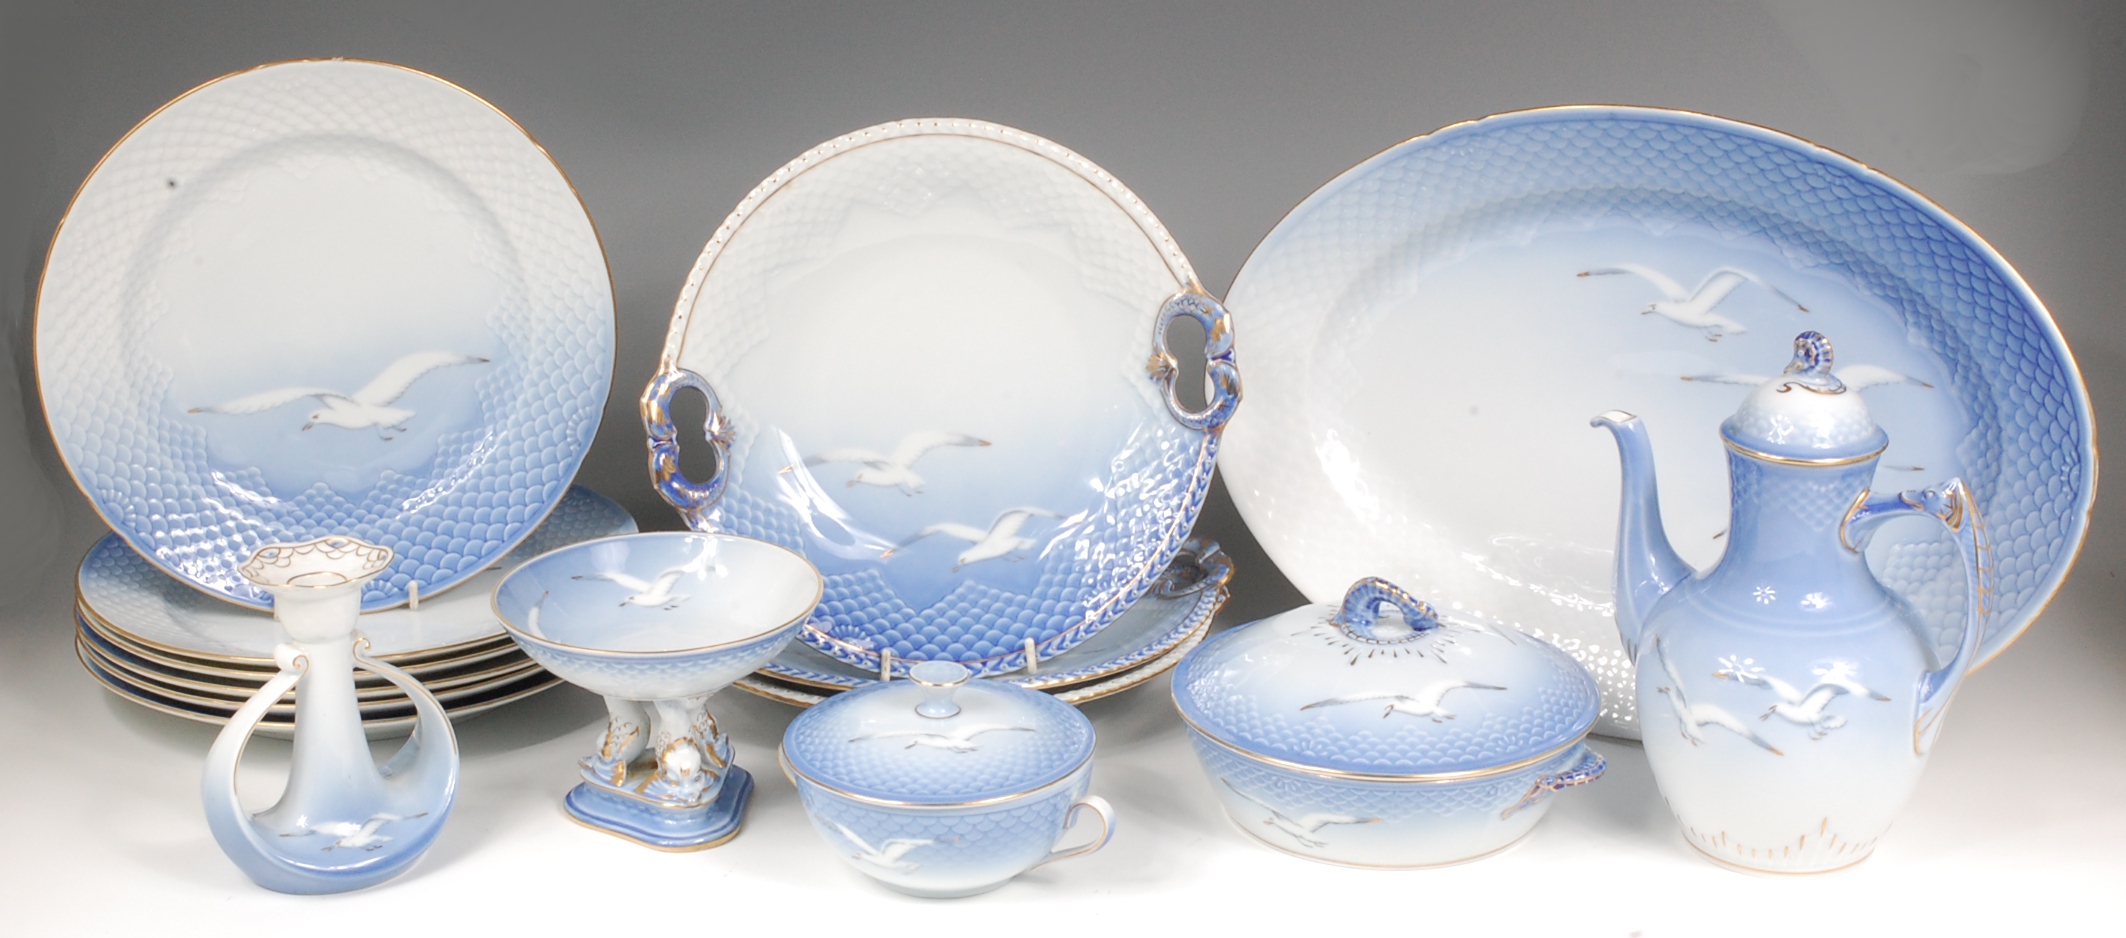 A Bing & Grondahl of Copenhagen porcelain six place setting dinner service, in the Seagull pattern,